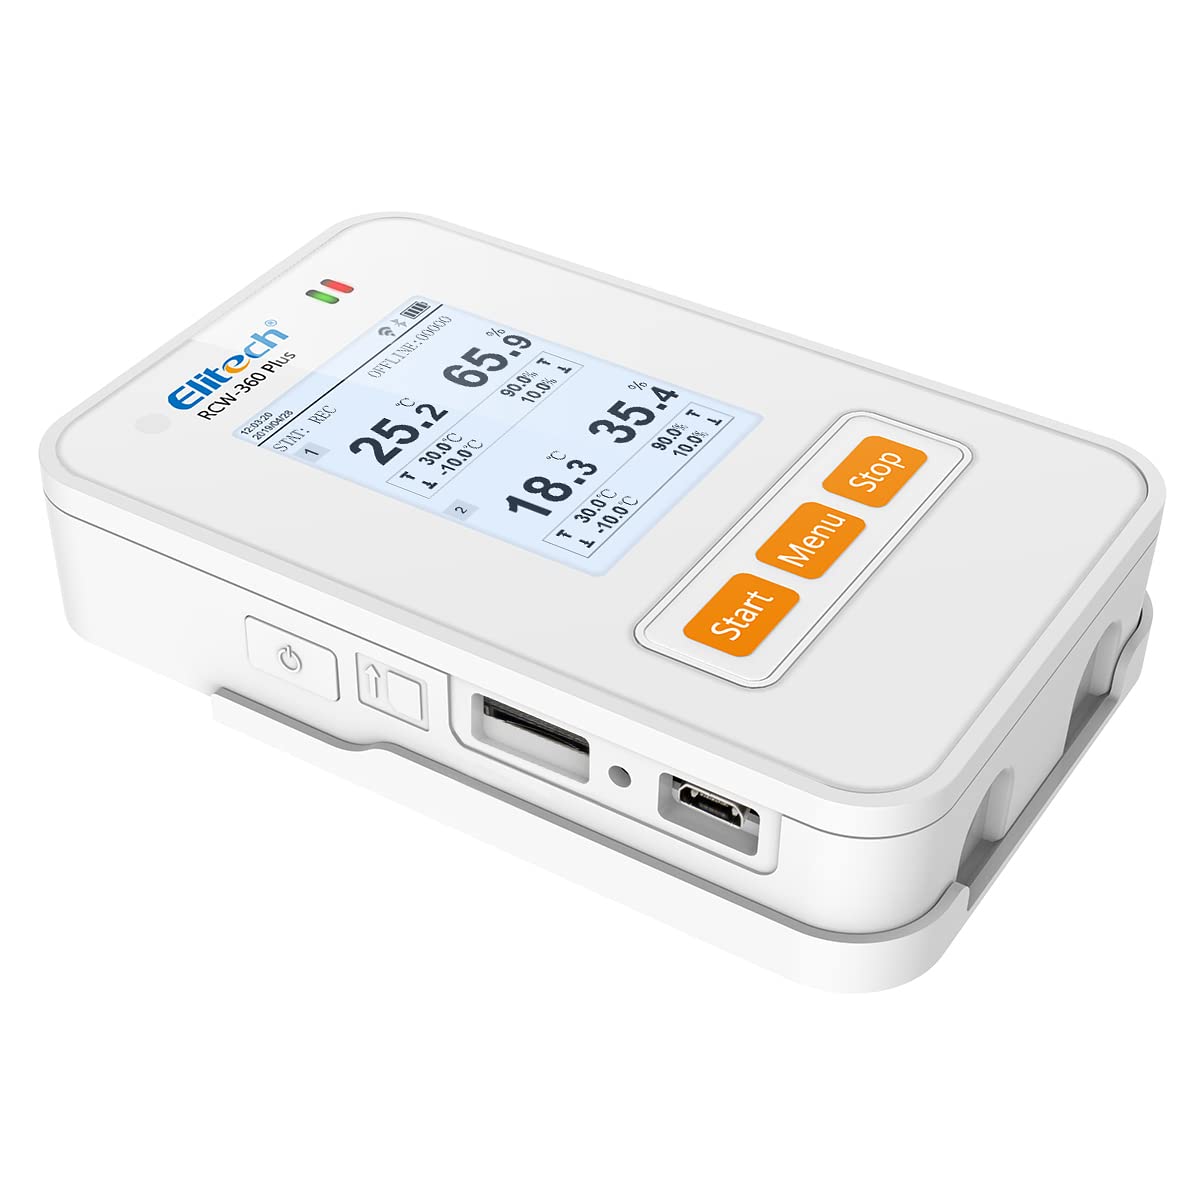 Elitech Wireless Digital Data Logger Remote Real-Time Temperature Humidity Monitor SIM Card Cloud Data Storage Dual External T&H Probe WiFi Communication, RCW-360PW-THDE (-40~176℉)